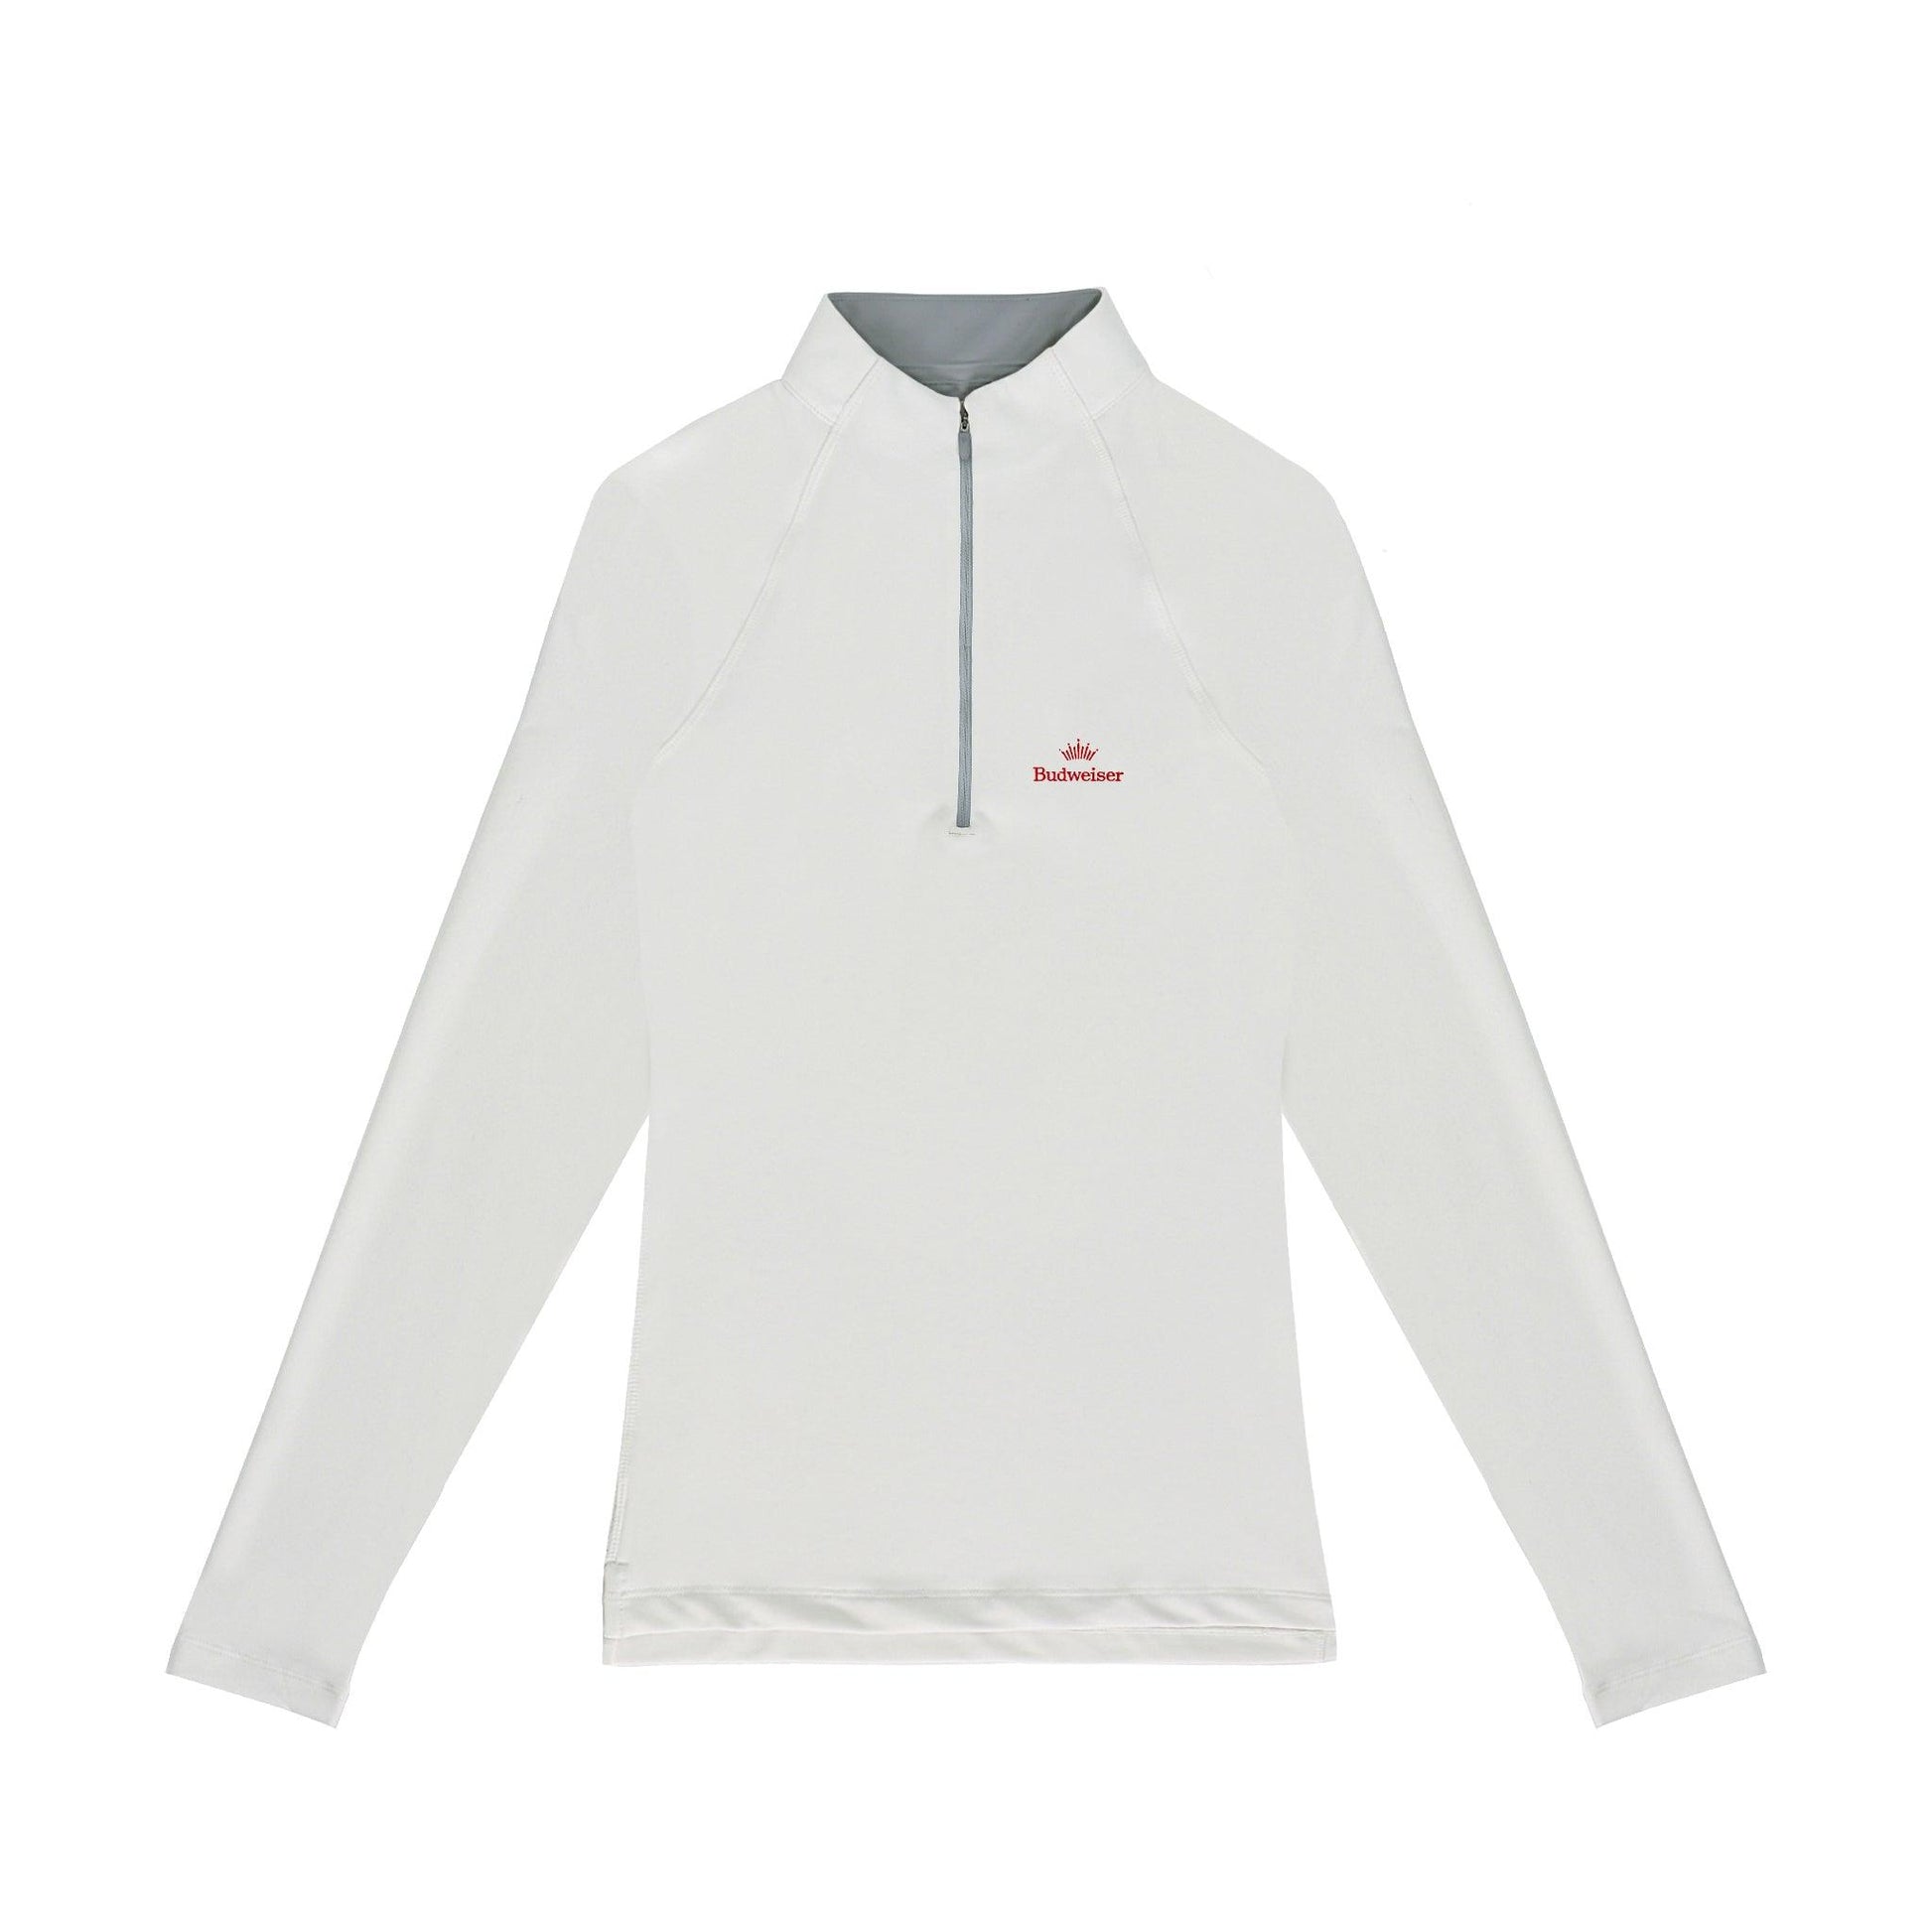 front of mens 1/4 zip with Budweiser logo on chest 